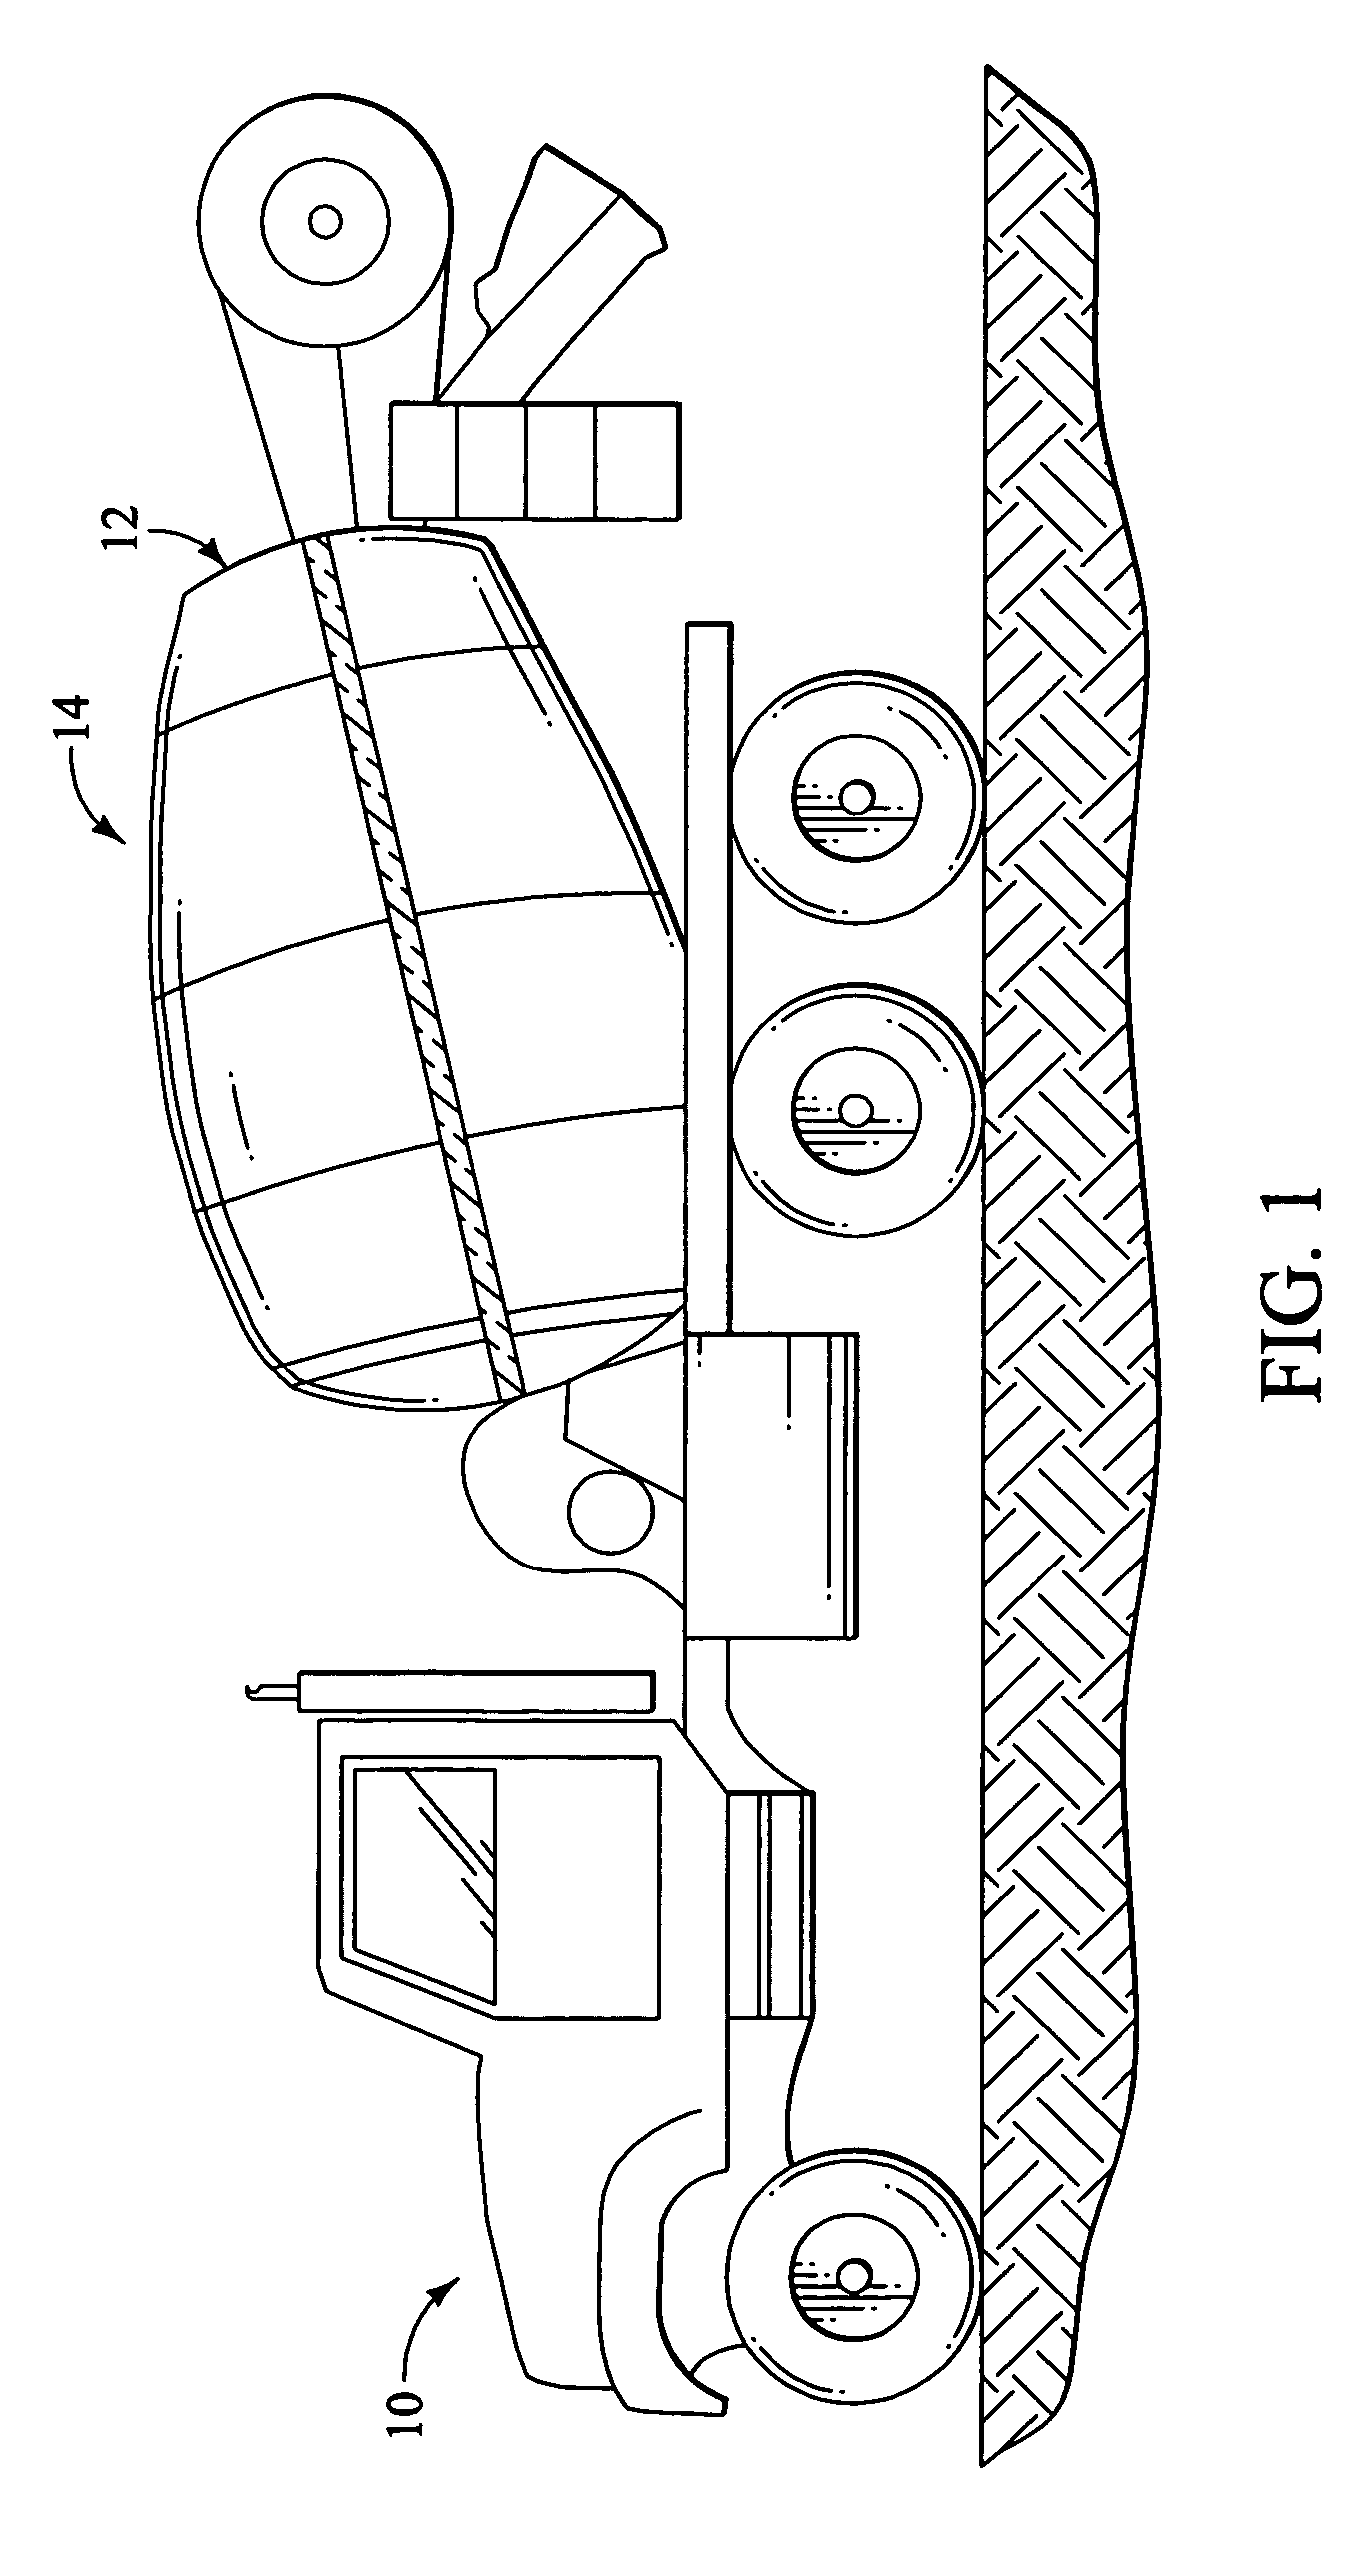 Thermal insulating device for concrete mixing trucks